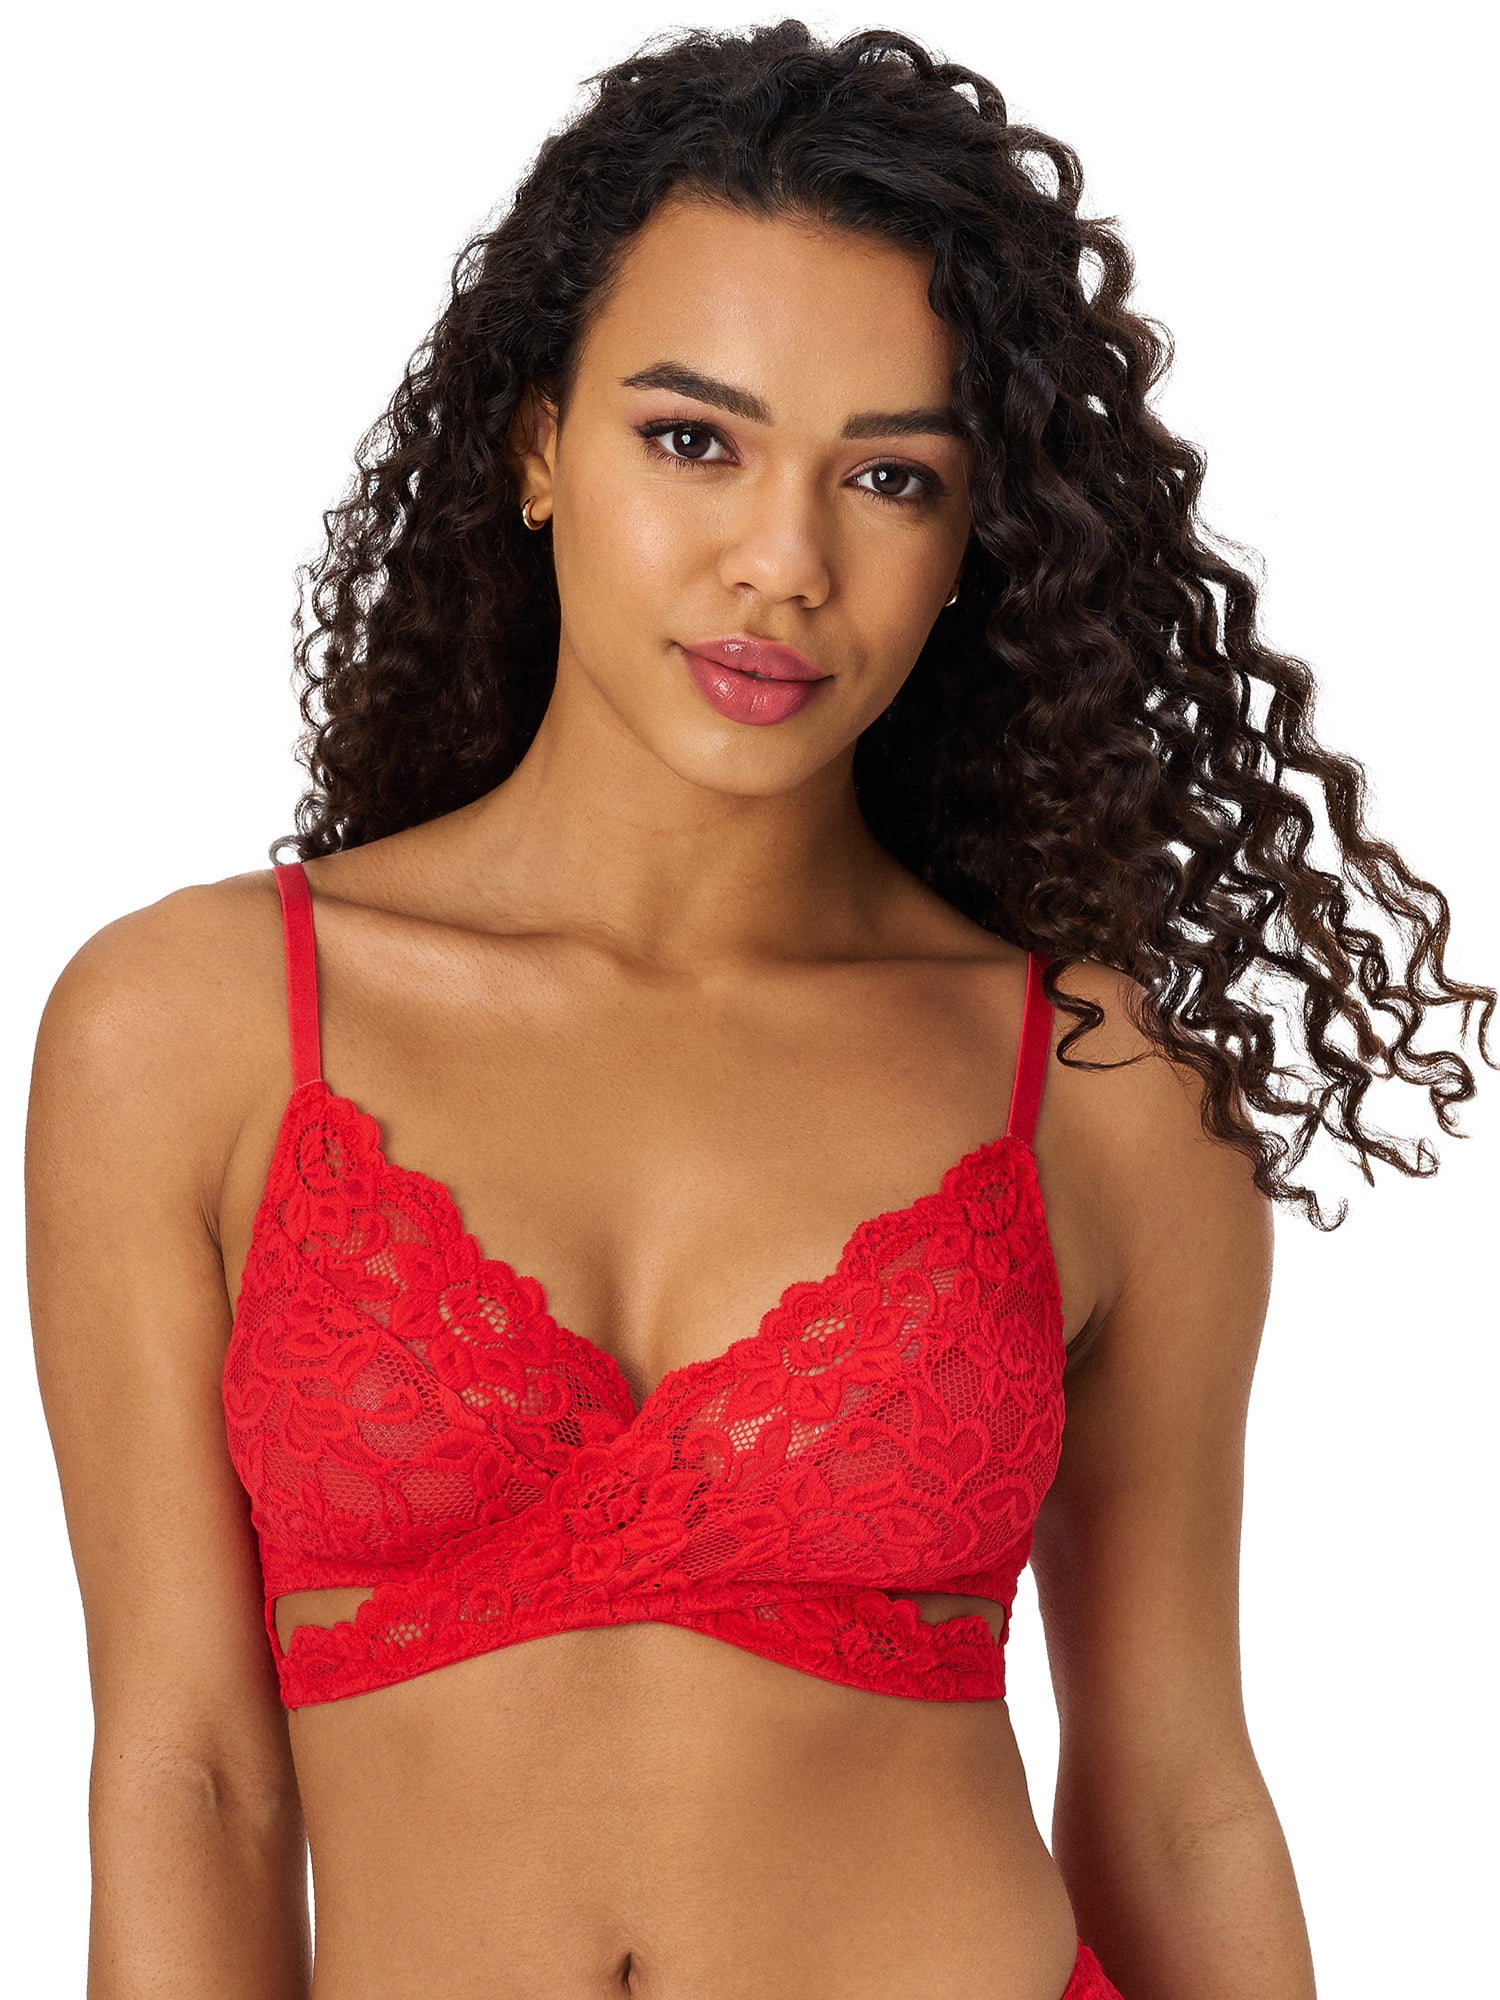 Adored by Adore Me Women's Blythe Lace Unlined Bralette With Adjustable  Straps, Sizes S-3X 